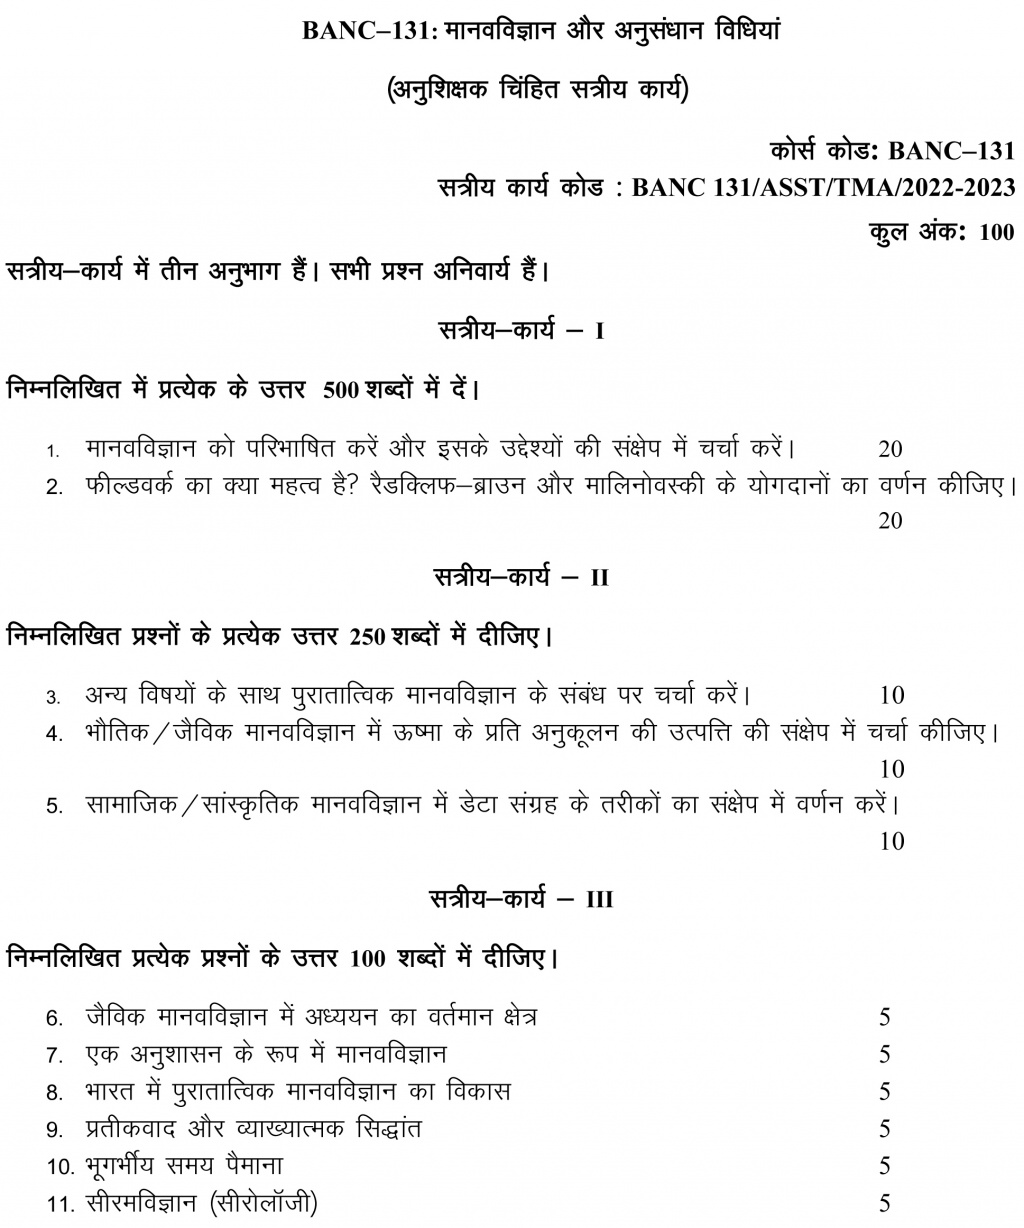 IGNOU BANC-131 - Anthropology and Research Methods, Latest Solved Assignment-July 2022 – January 2023